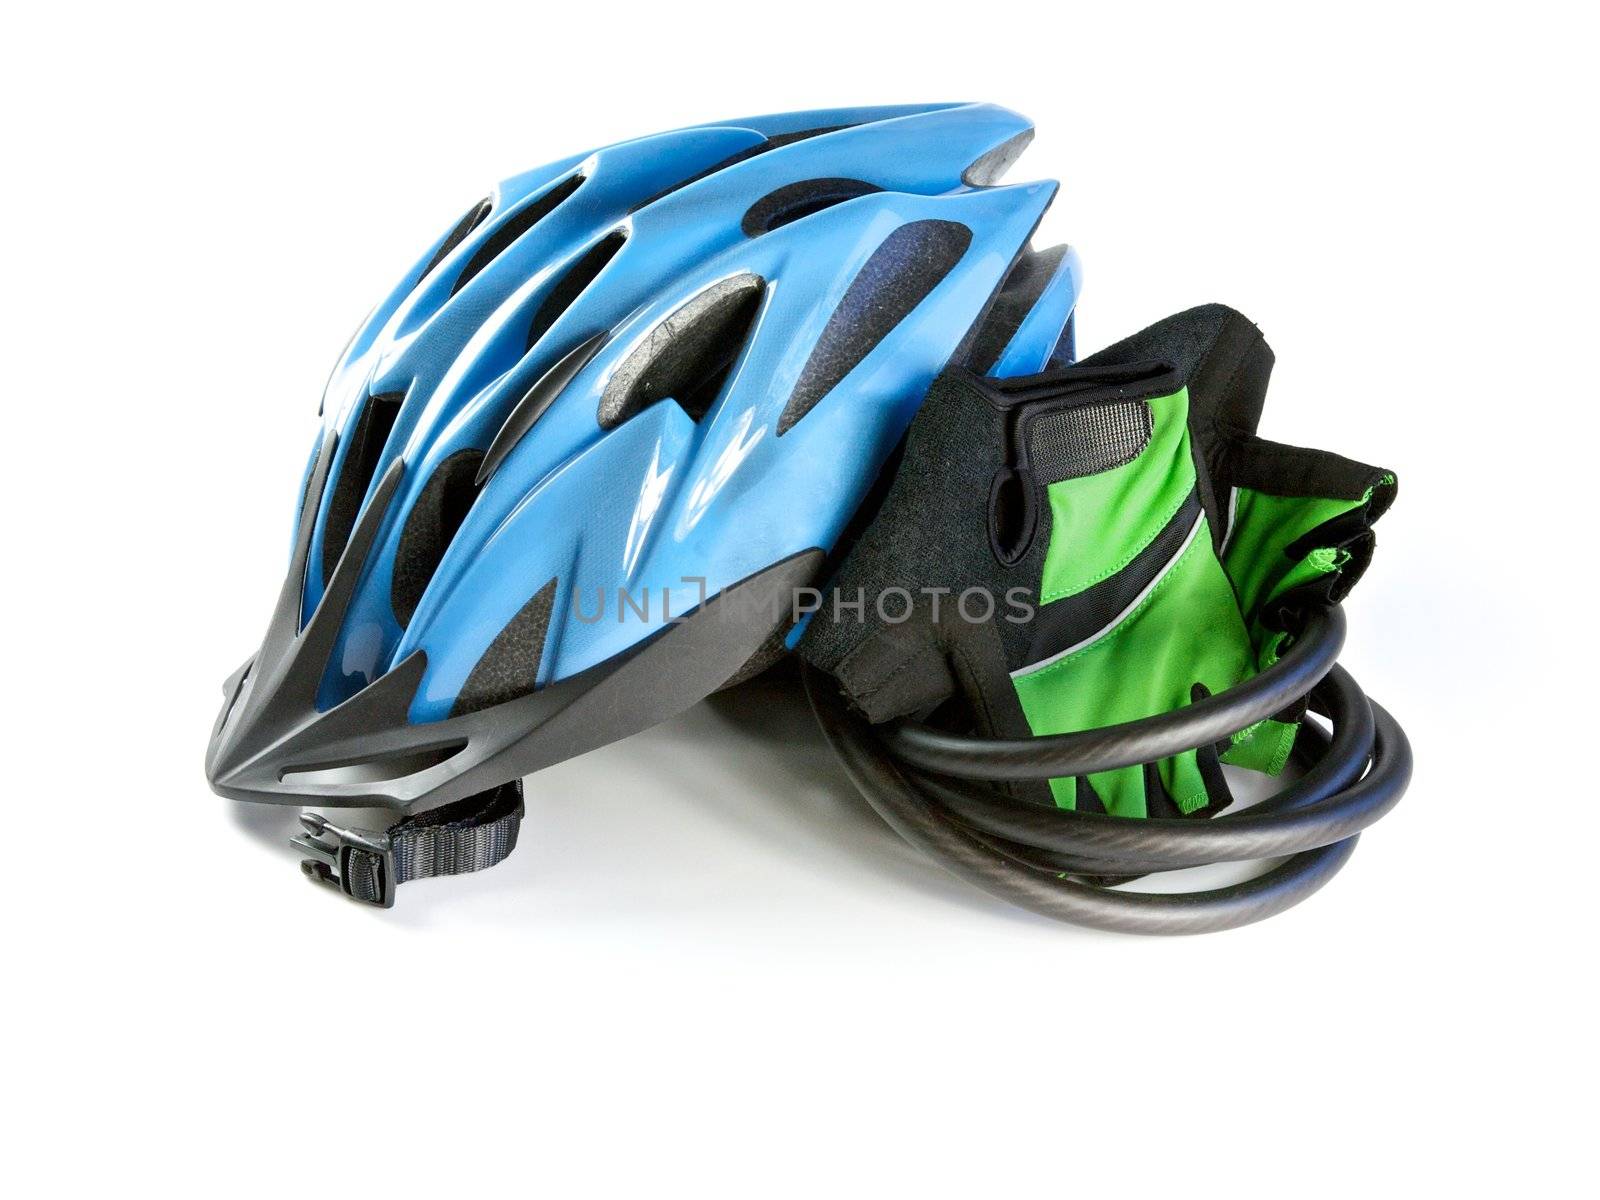 Cycling, Biking Helmet with riding gloves and lock